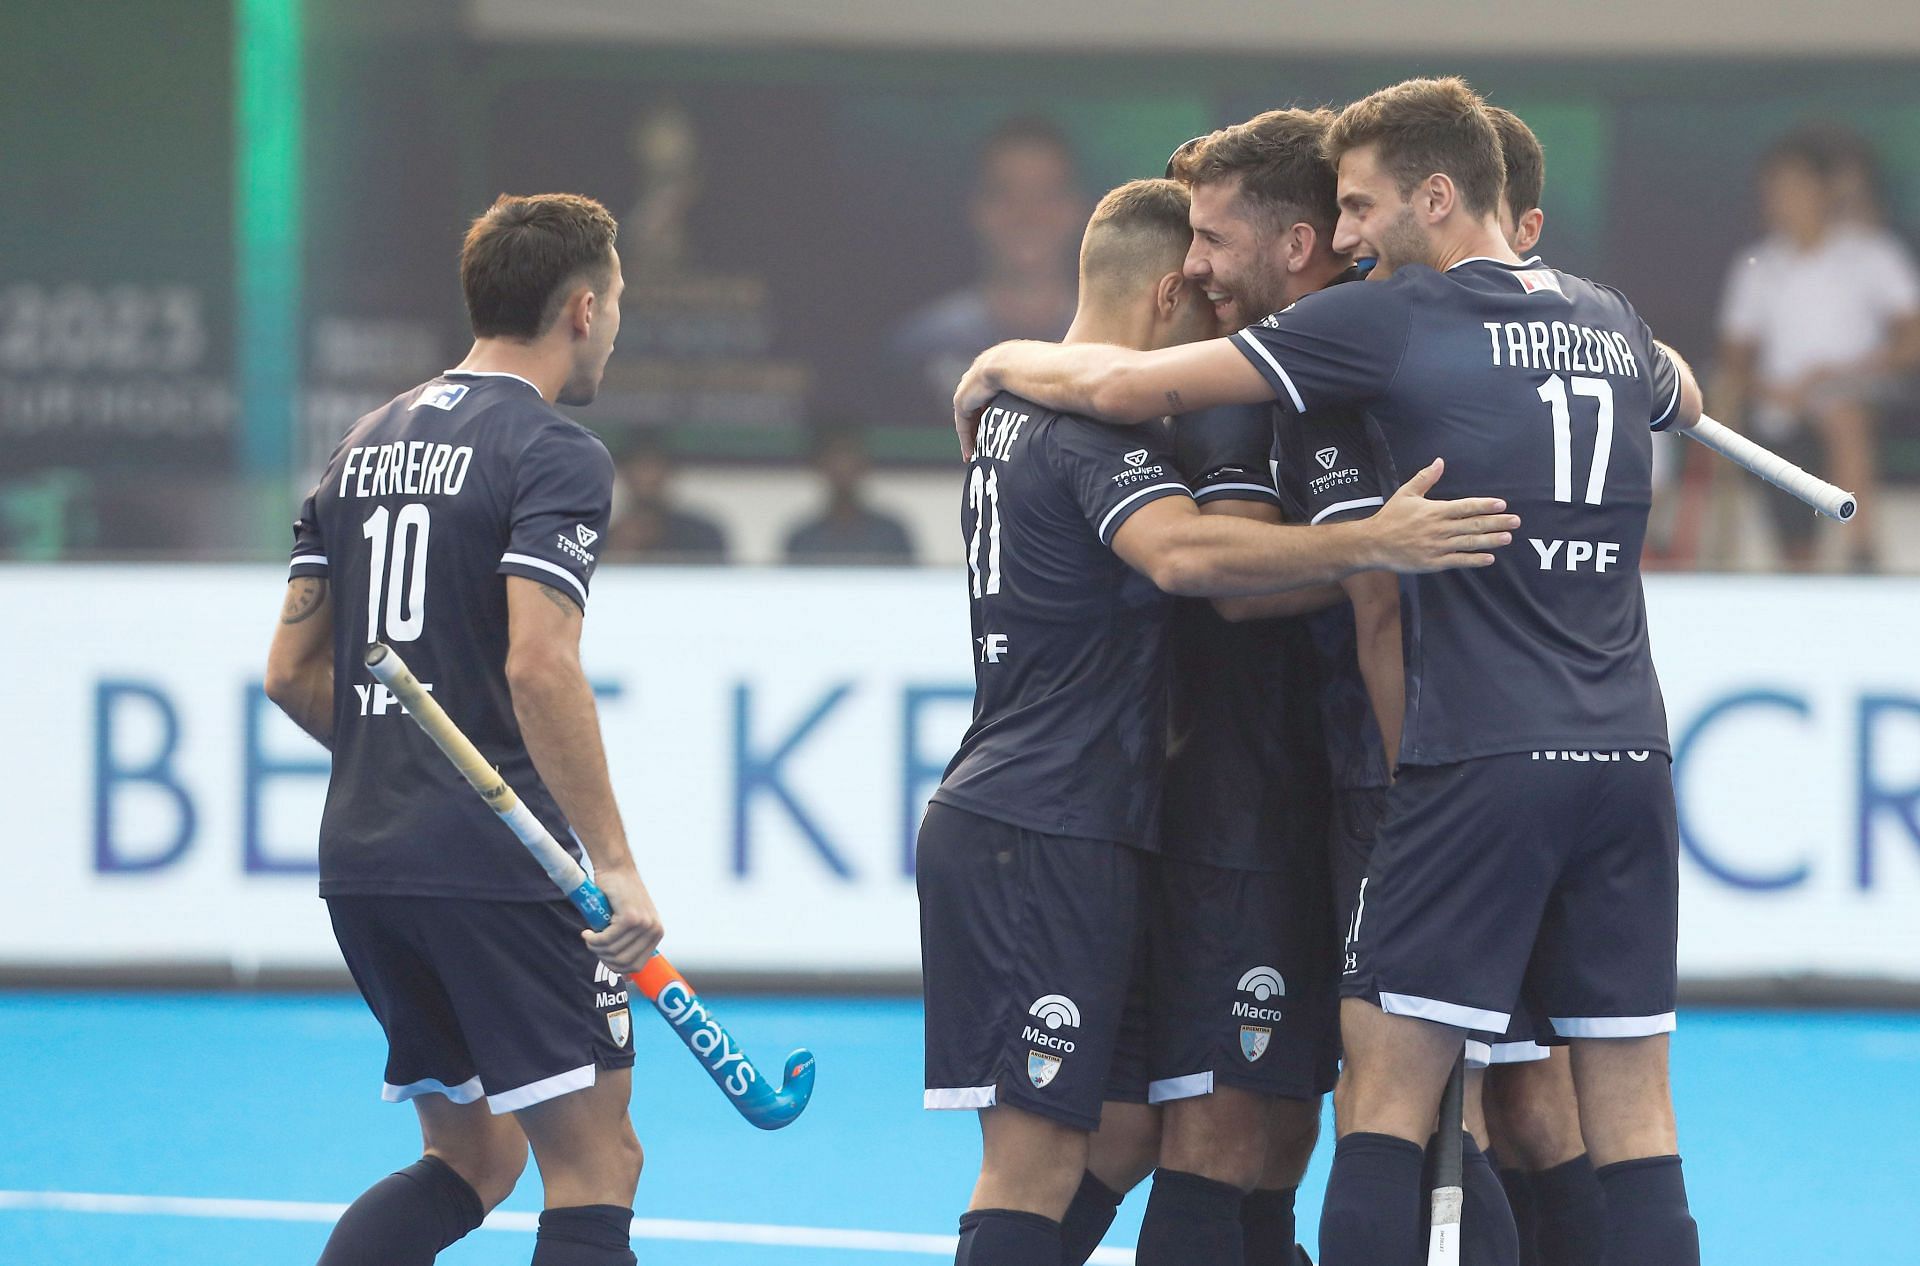 Argentina celebrating a goal against France in an earlier match (Image Courtesy: Twitter/Hockey India)